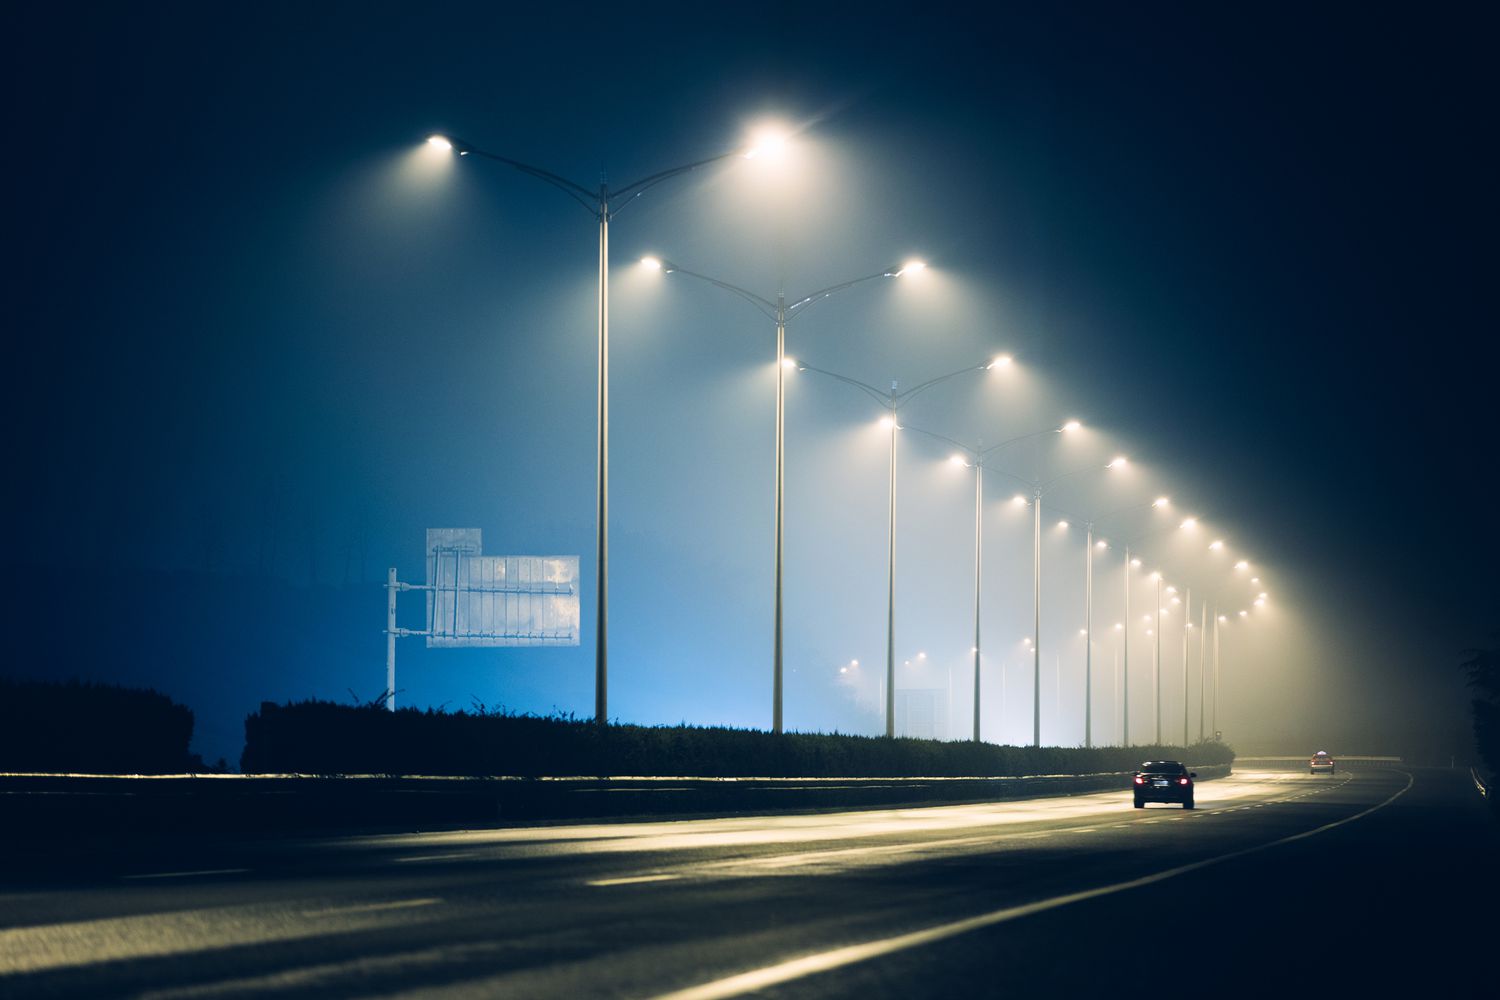 What Are A Few Recommendations For Reducing The Installation Costs Of RevolveLED Parking Lots And Street Lighting?